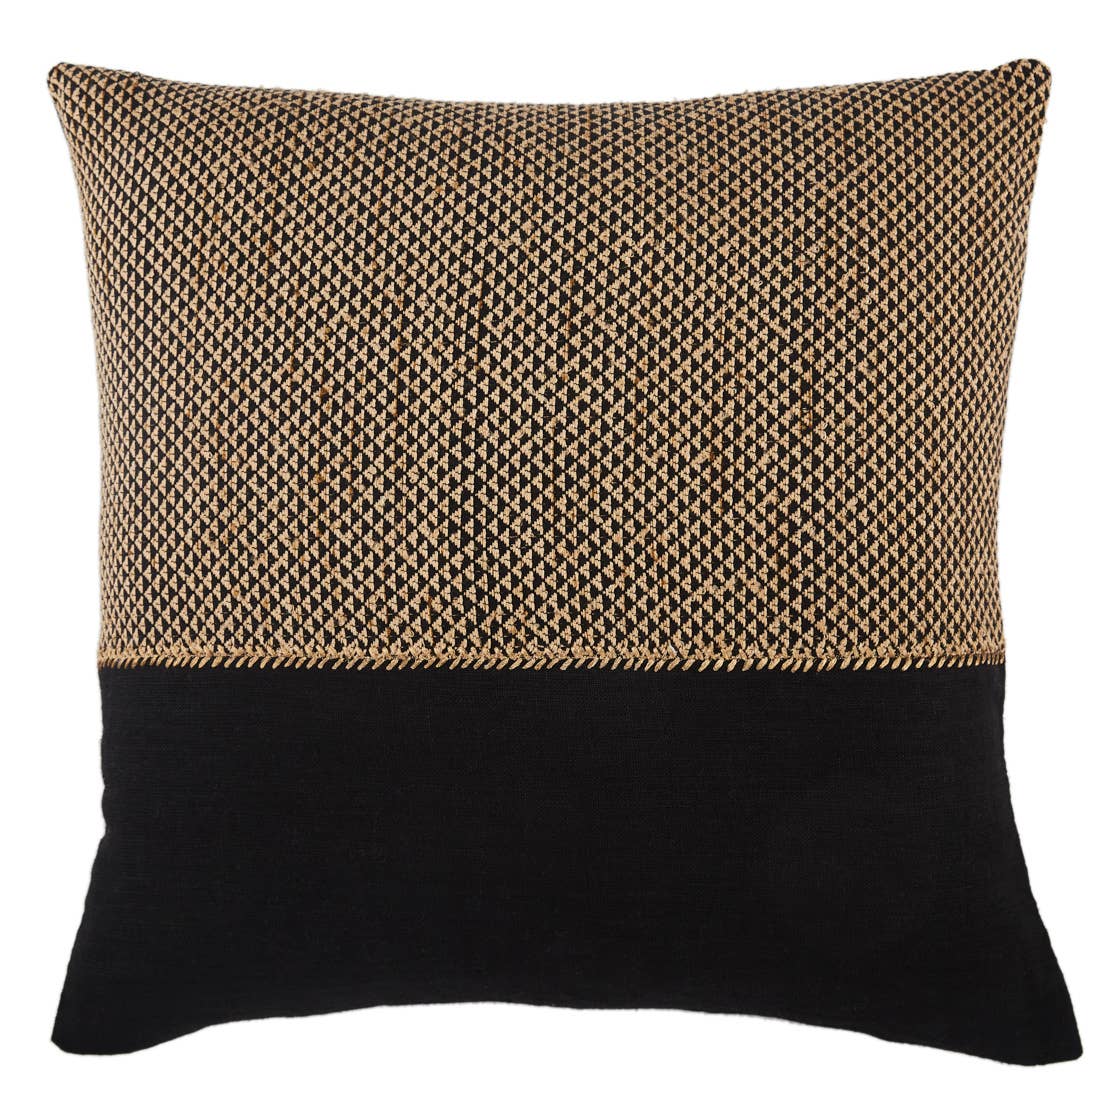 Sophisticated simplicity defines the texturally inspiring Taiga collection. Crafted of soft linen, viscose, and cotton, the Sila pillow boasts a mix of pattern-rich and embroidered details. Deep black and tan tones lend a bold yet versatile complement to any space.  Size: 22" x 22"